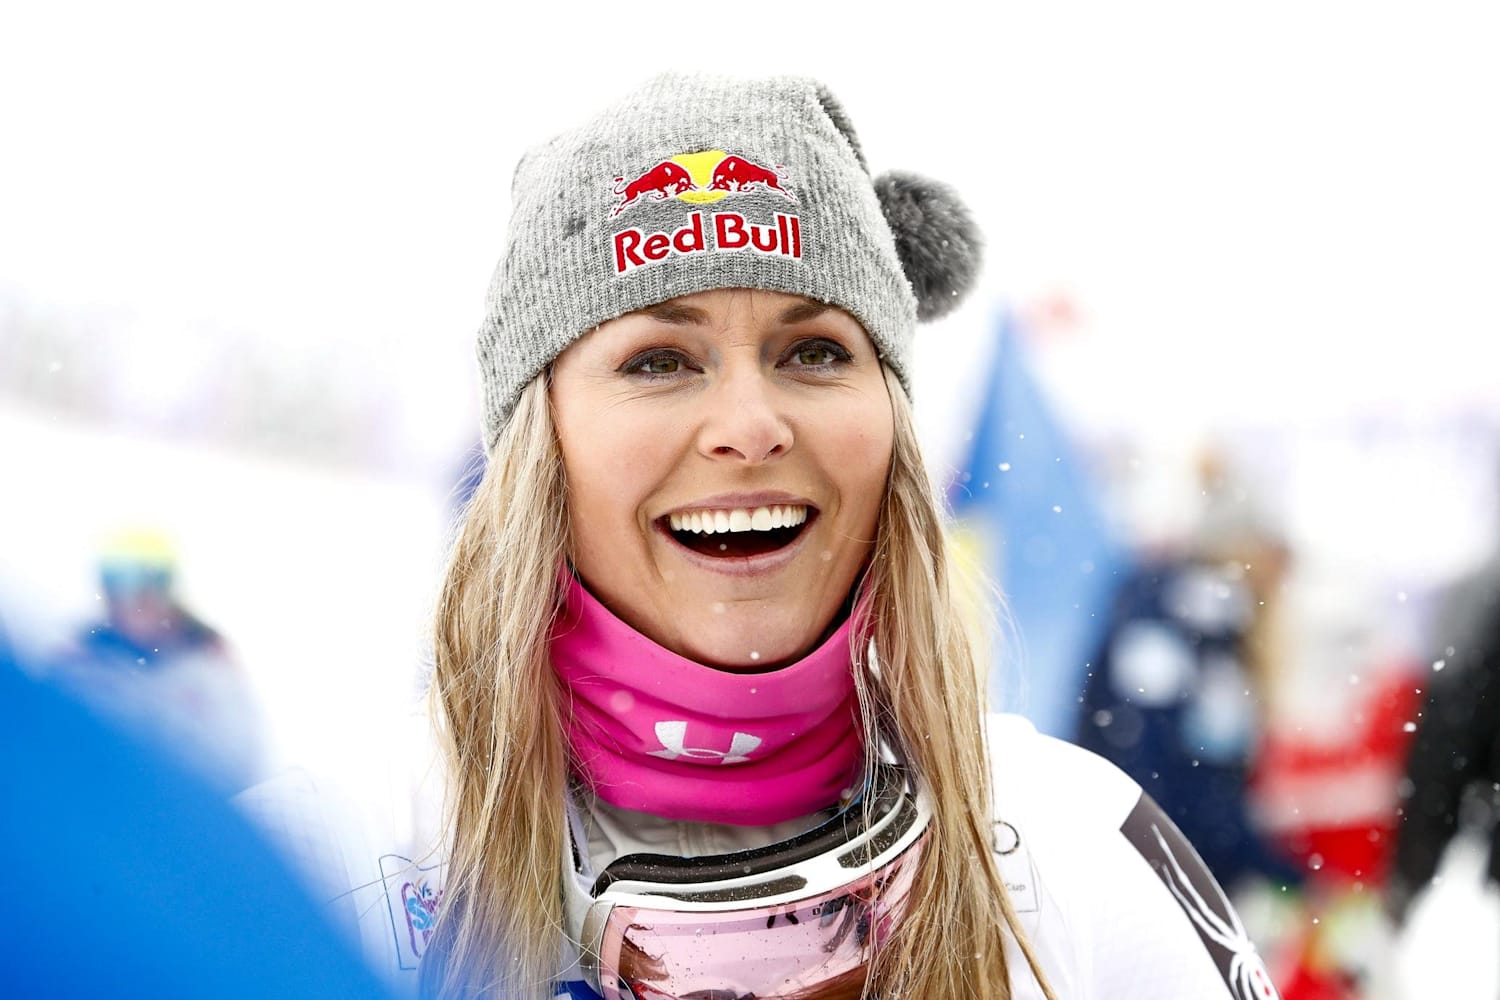 Watch a personal interview with Lindsey Vonn.